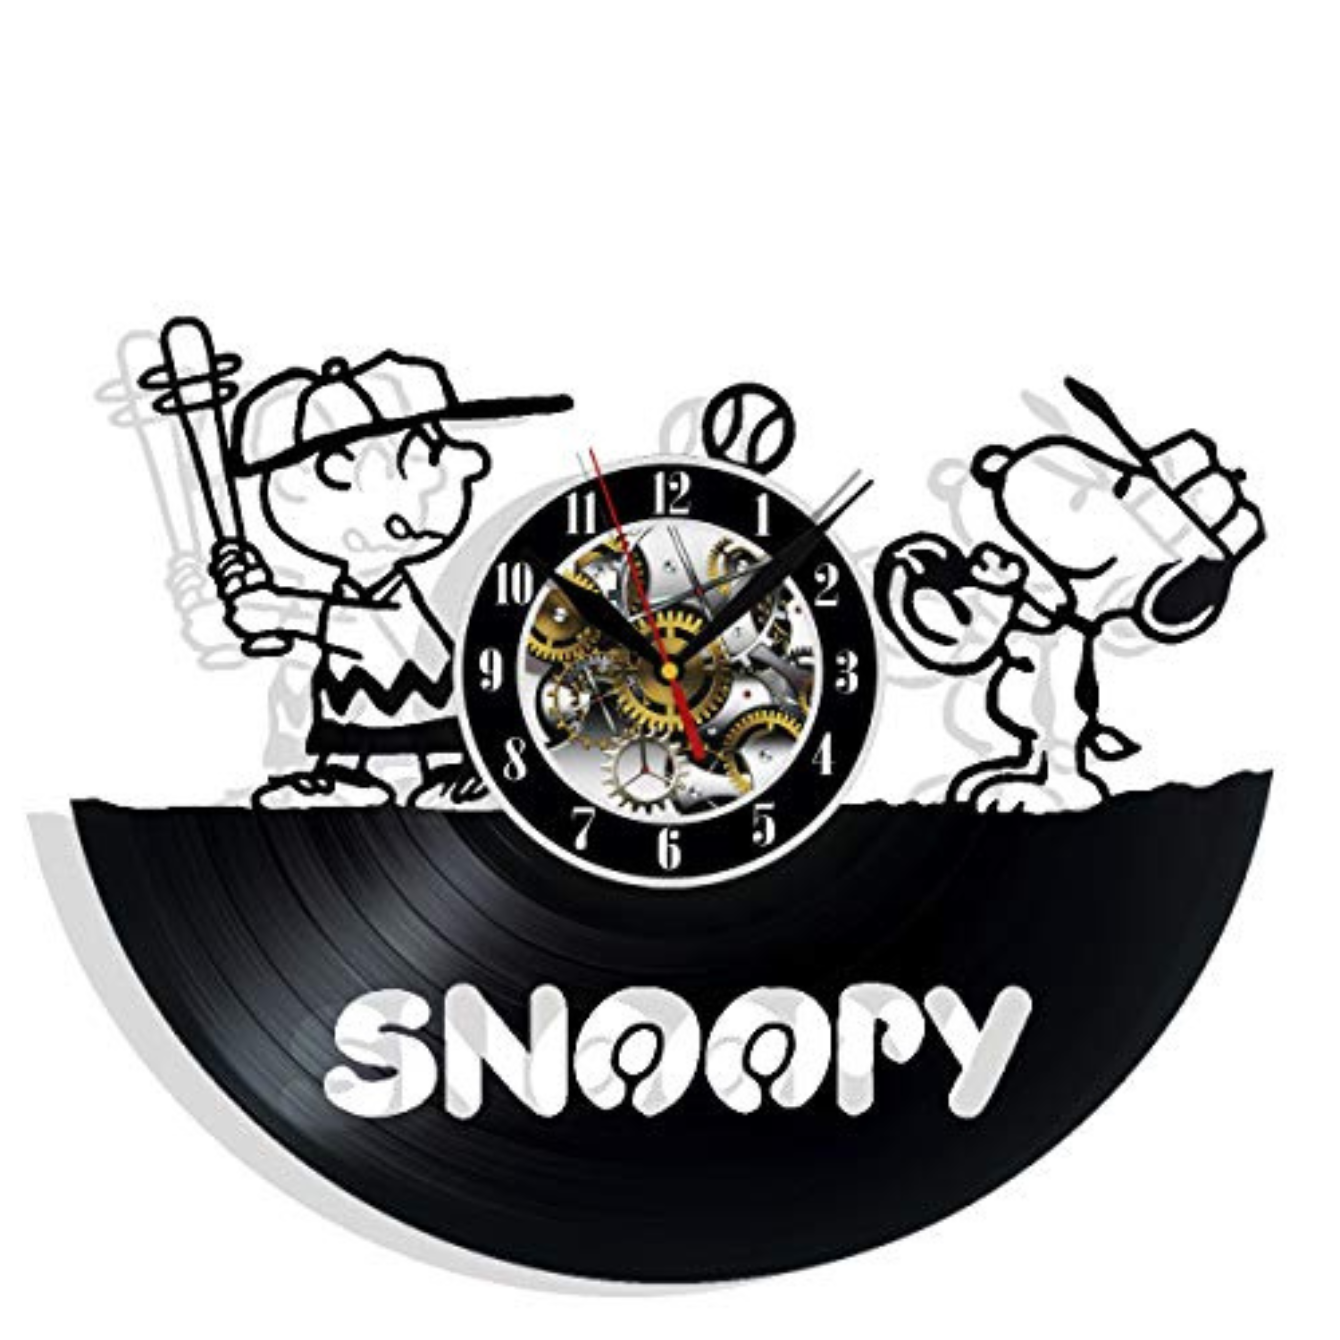 Snoopy (Let's Play Ball!) Wall Clock